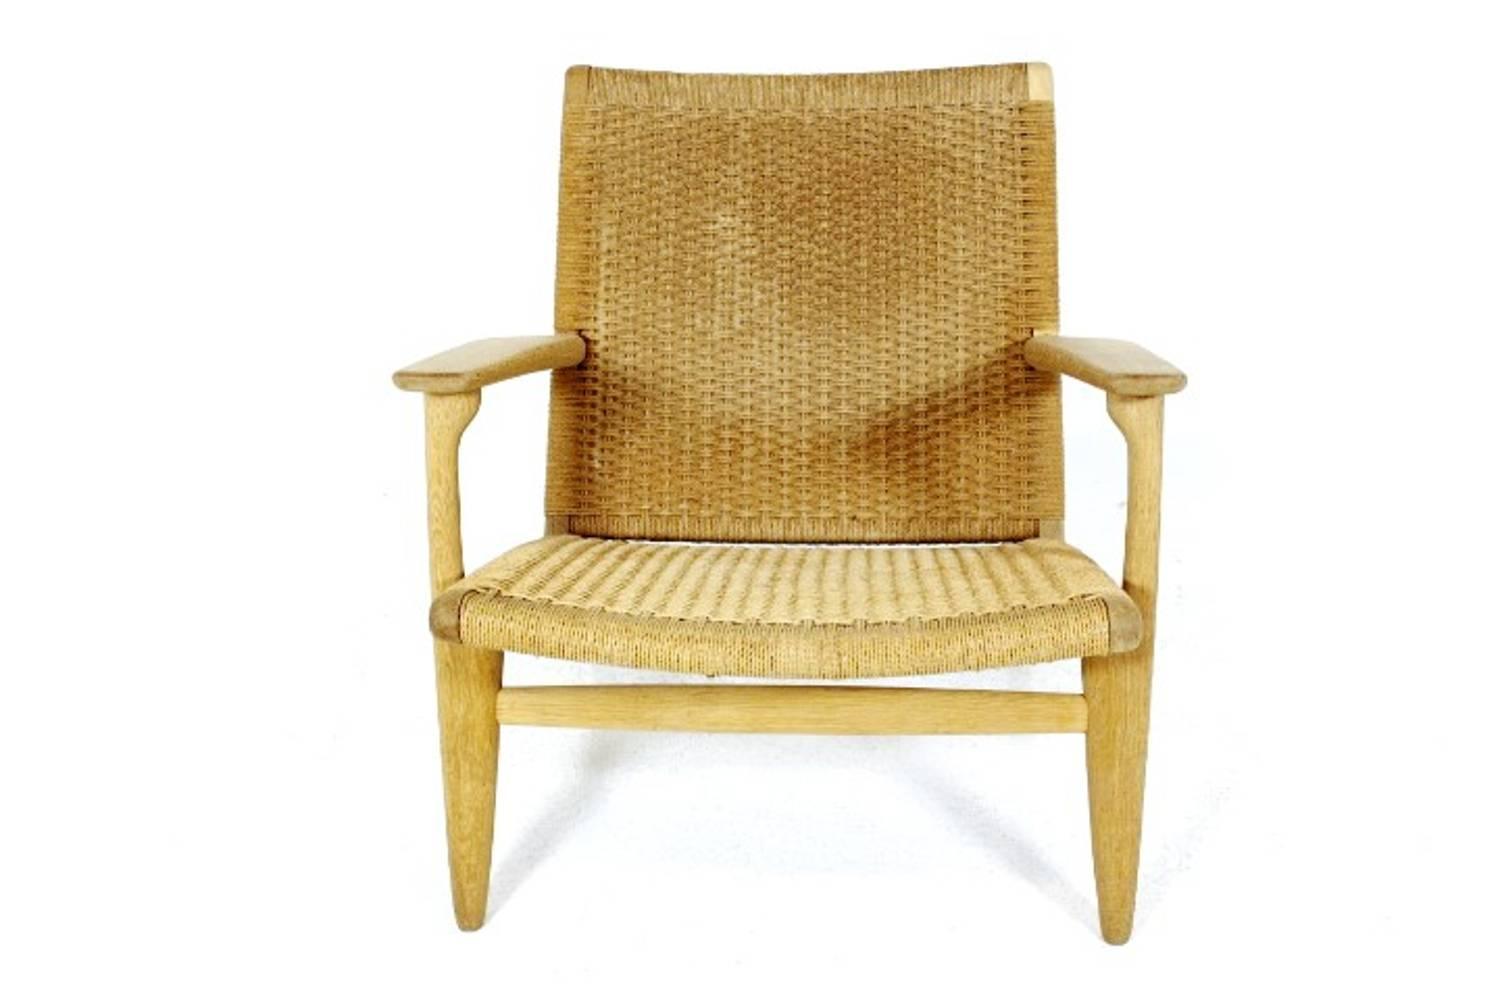 Beautiful Midcentury CH25 lounge chair in wonderful oak with woven papercord back and seat. Designed by Hans J Wegner in the 1950s for Carl Hansen & Søn, Denmark.